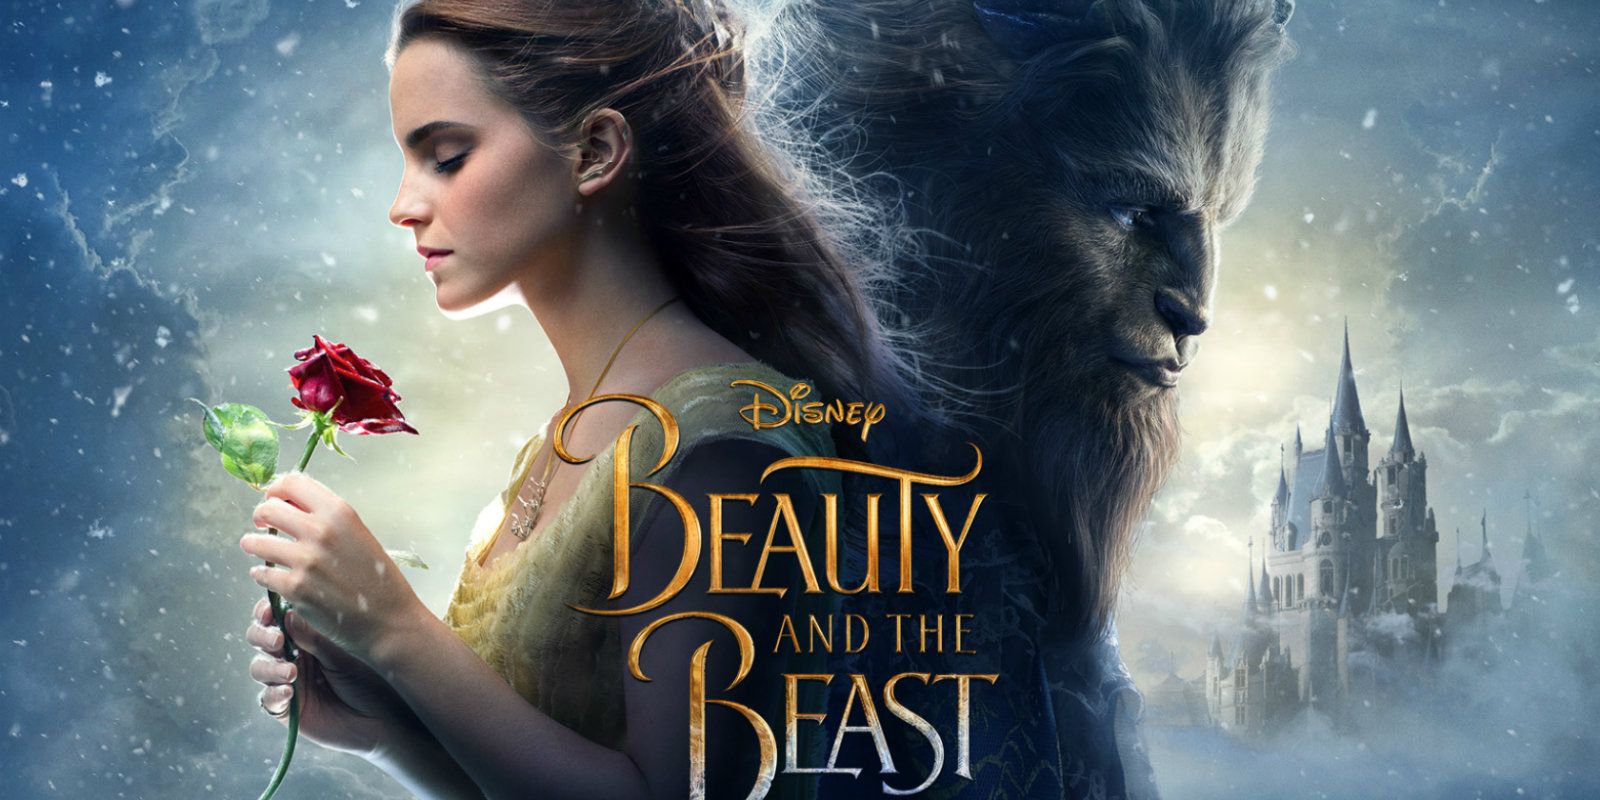 Beauty and the Beast (2017) Soundtrack cover - cropped